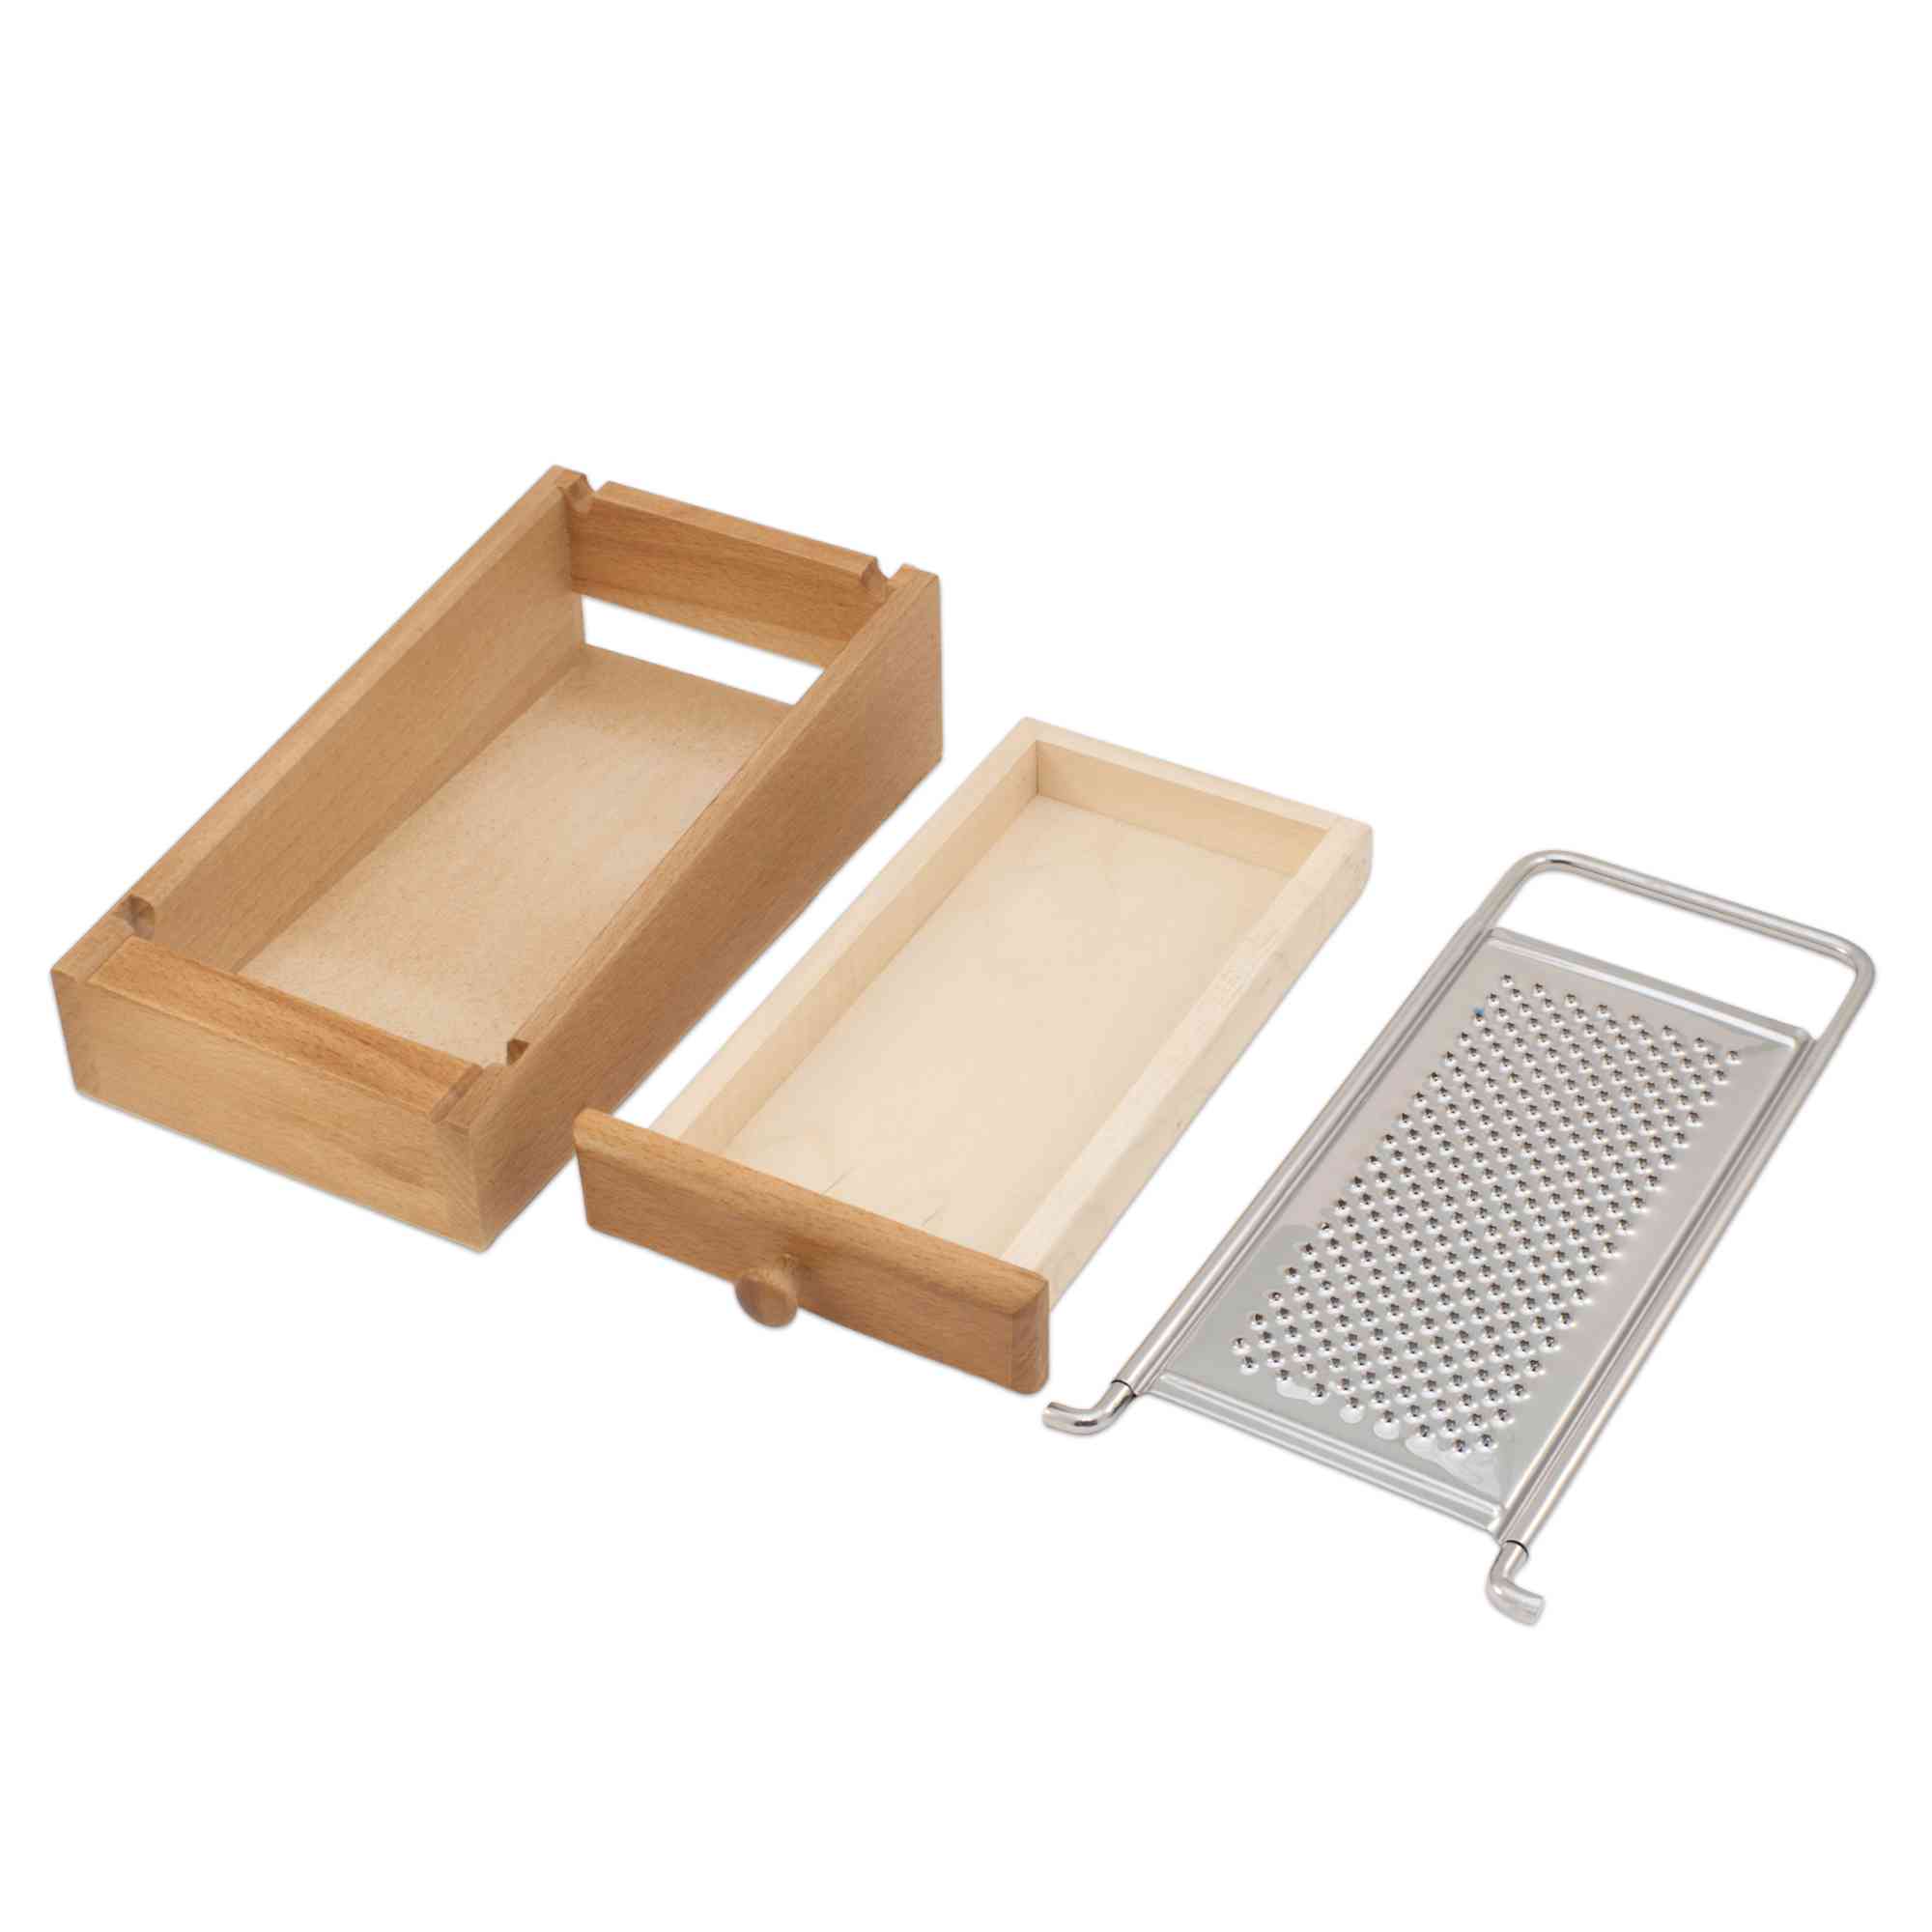 Wooden Cheese Grater Box With Drawer – Pasta Kitchen (tutto pasta)